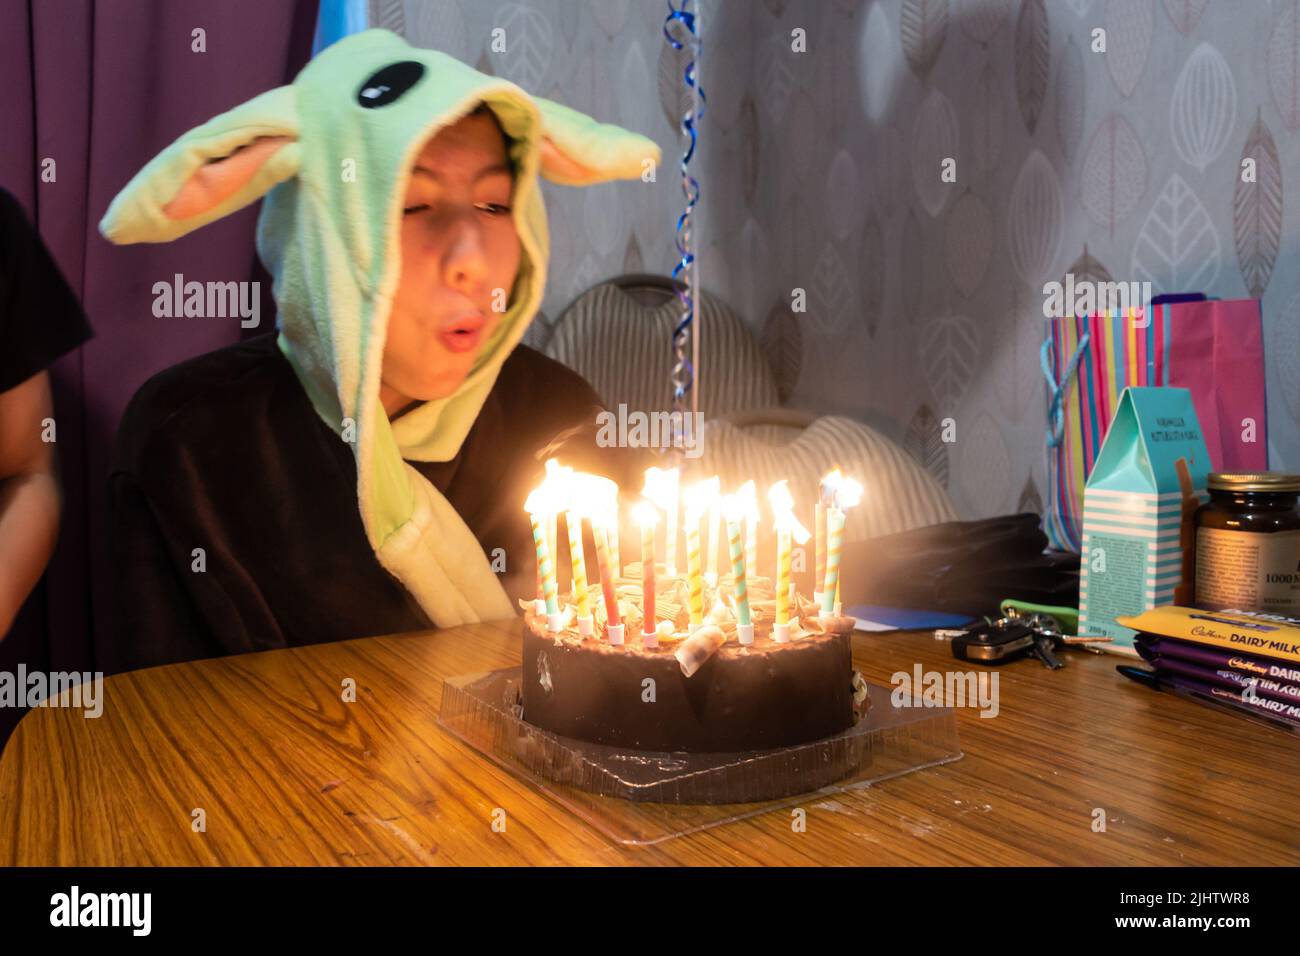 A boy blows out candles on a chocolate birthday cake while wearing a Yoda dressing gown. Stock Photo